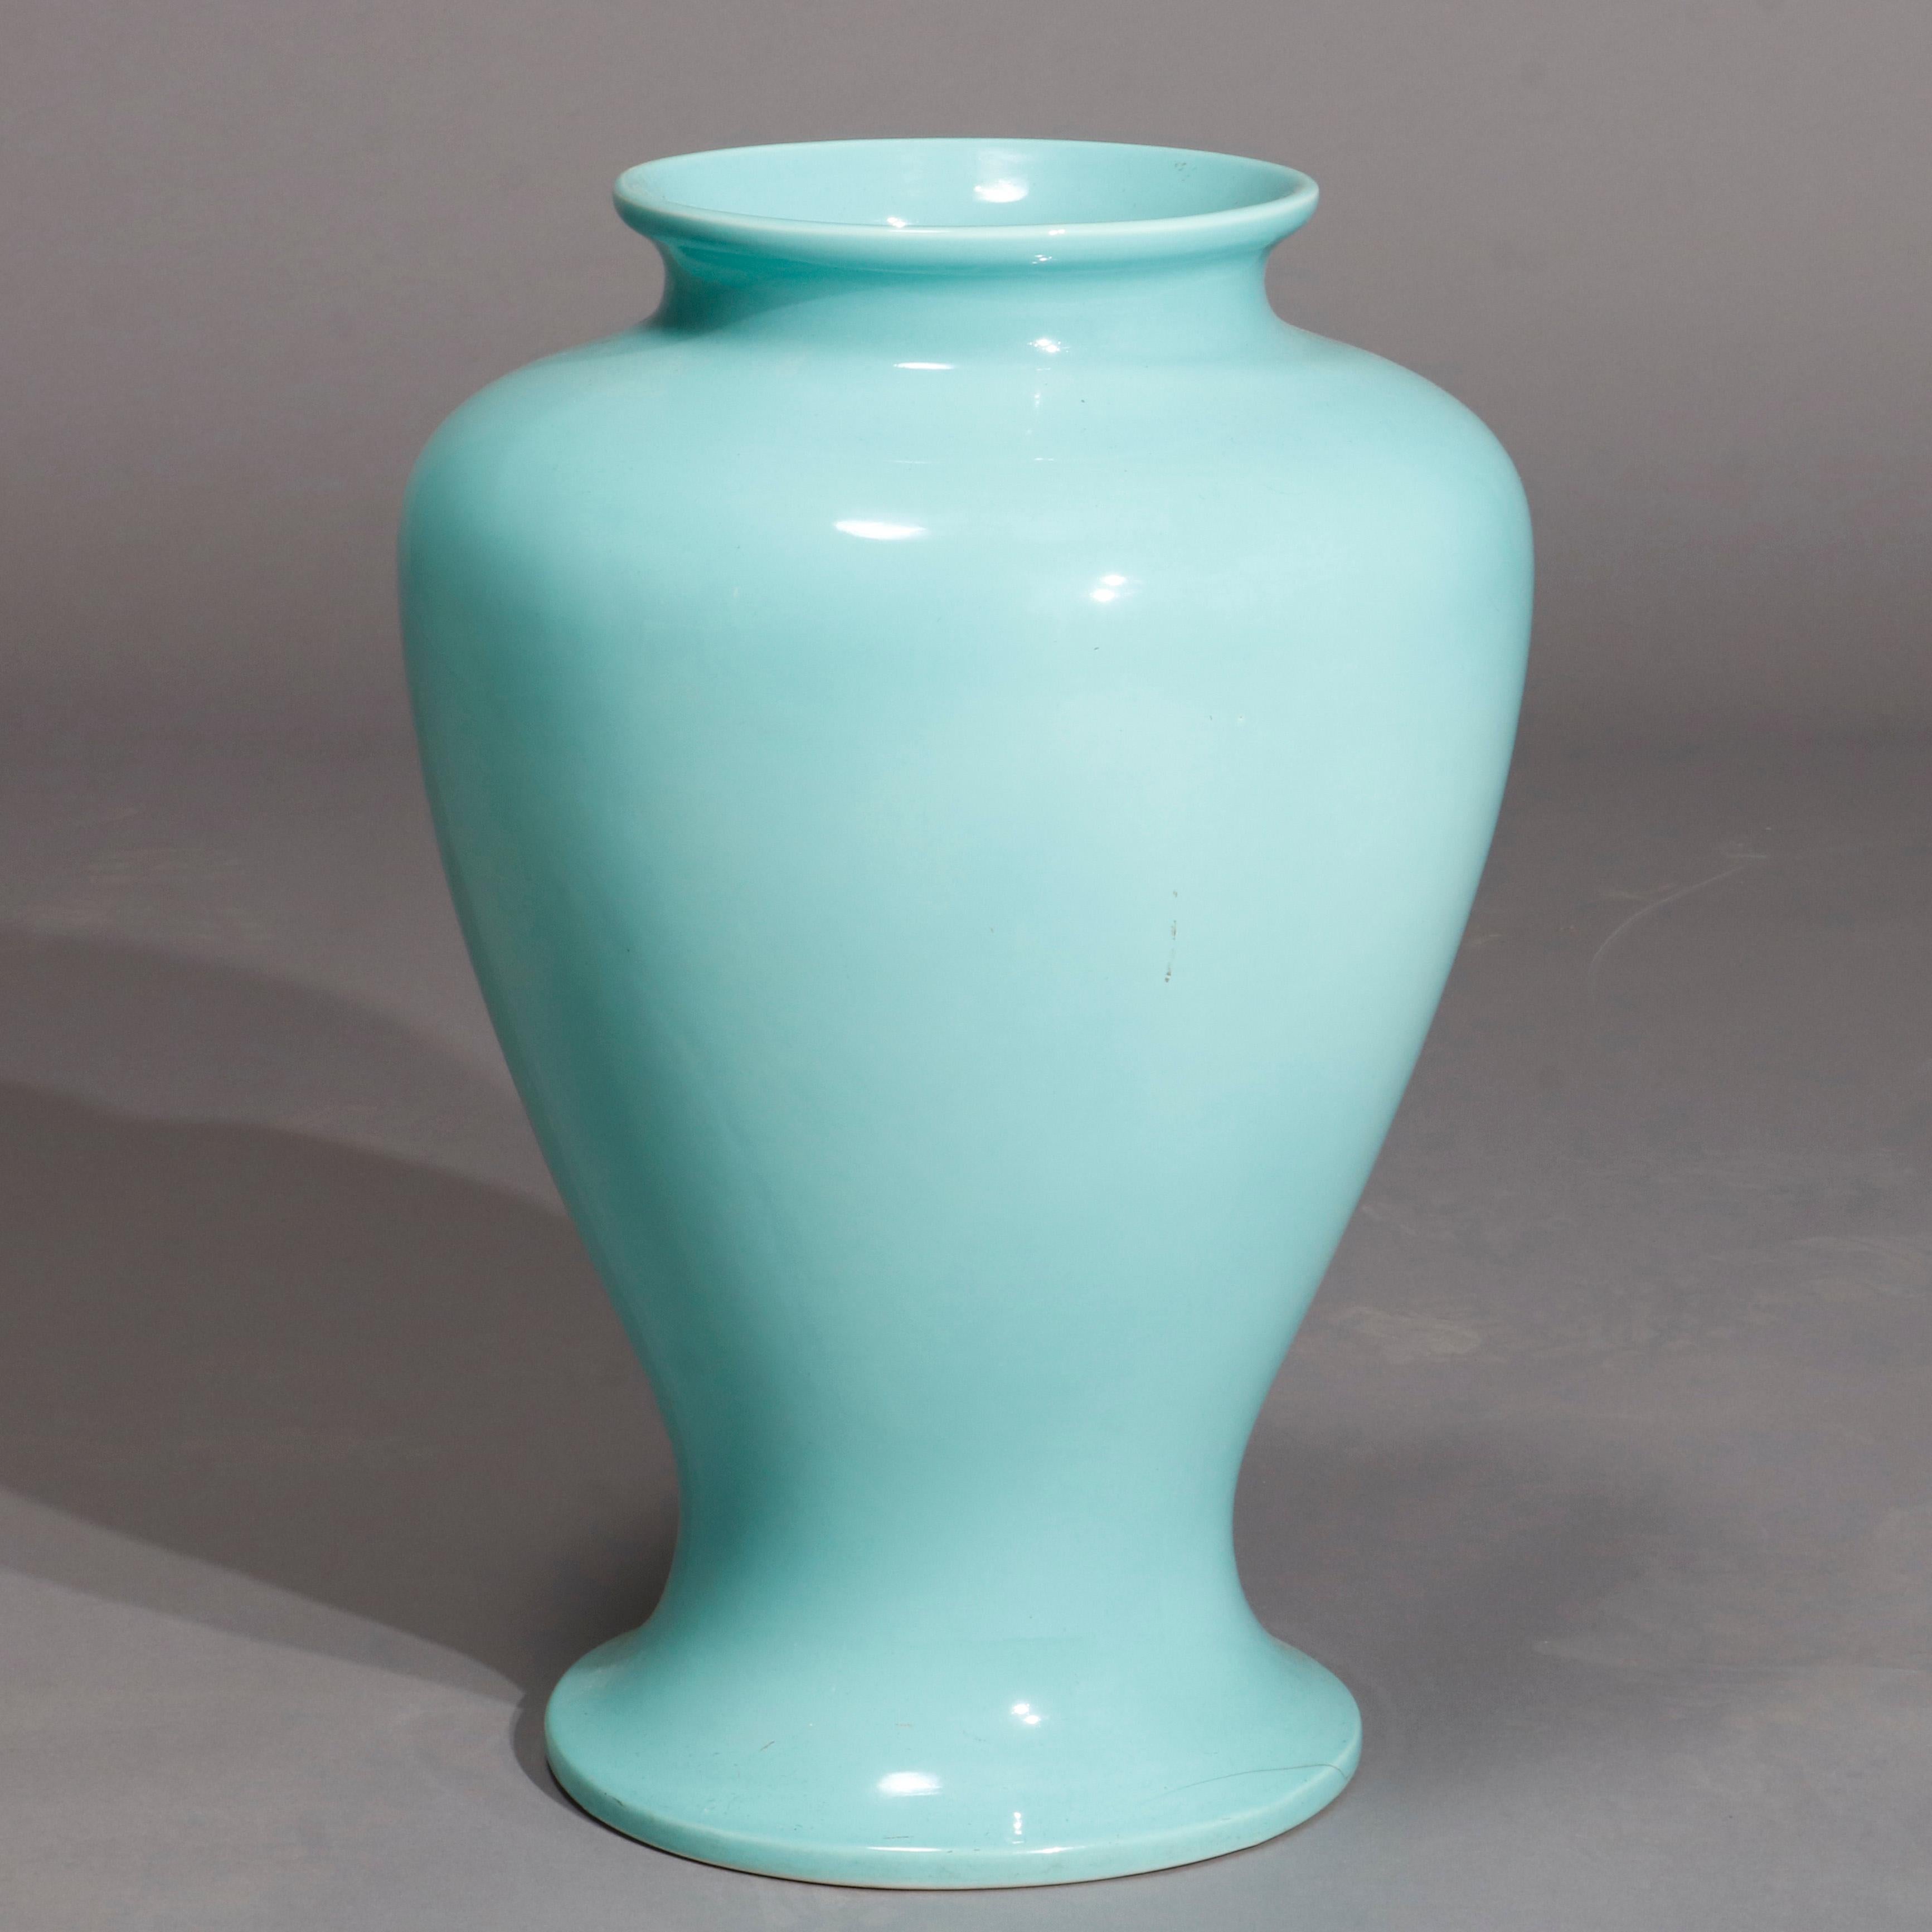 An antique Arts & Crafts Trenton ware art pottery floor vase offers blue glazed urn form vessel with maker stamp on base as photographed, 20th century

Measures- 23